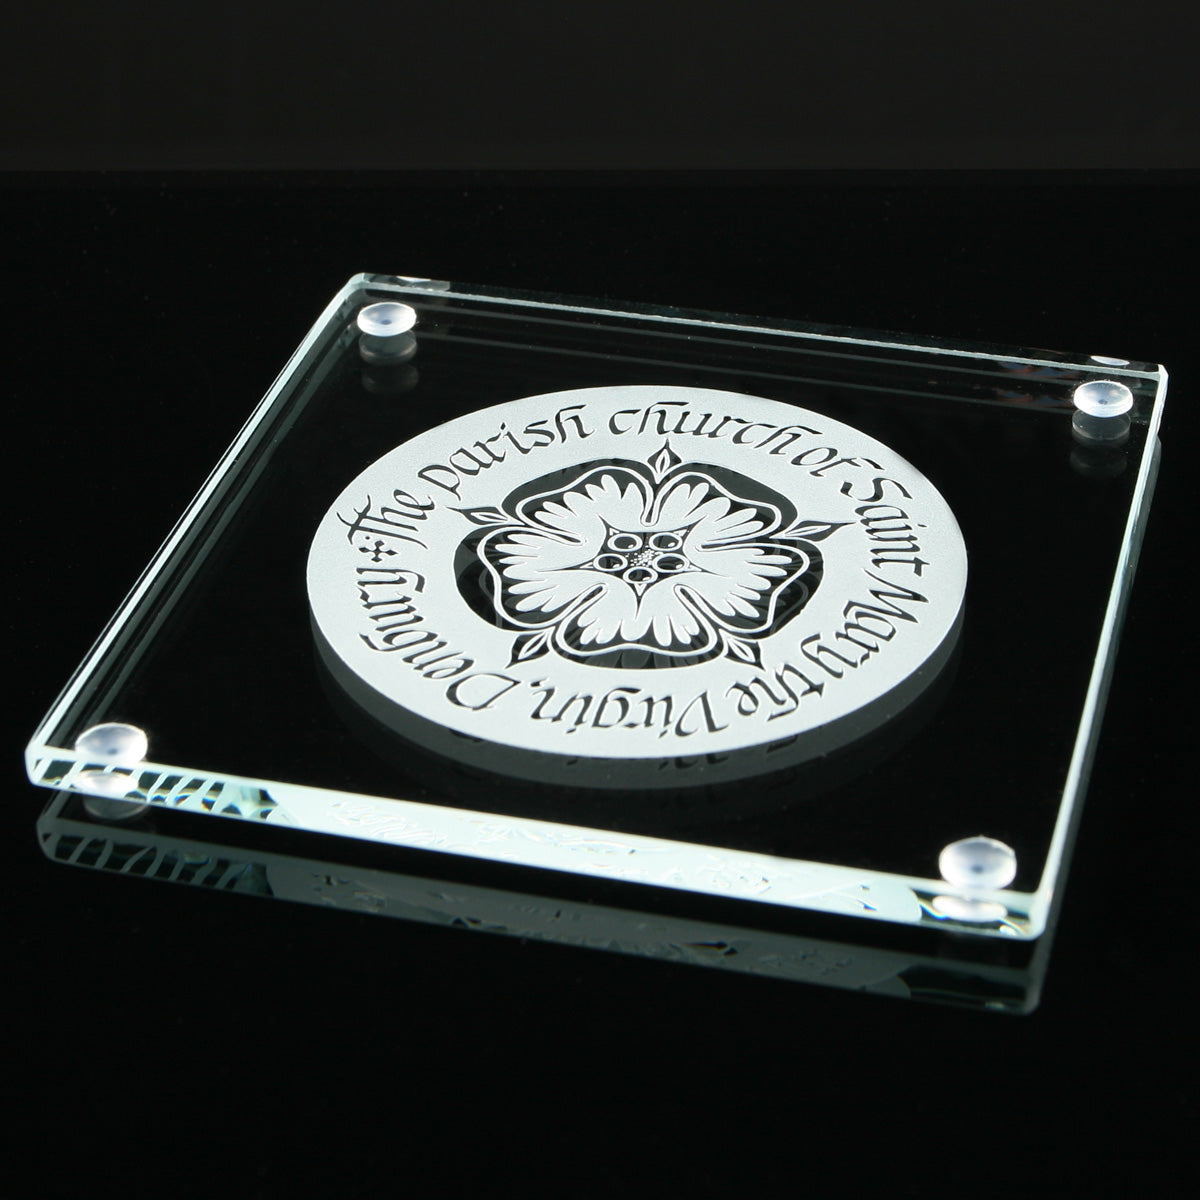 90 X 90 X 5mm Plain Square Glass Coaster, White Box (available with engraving)